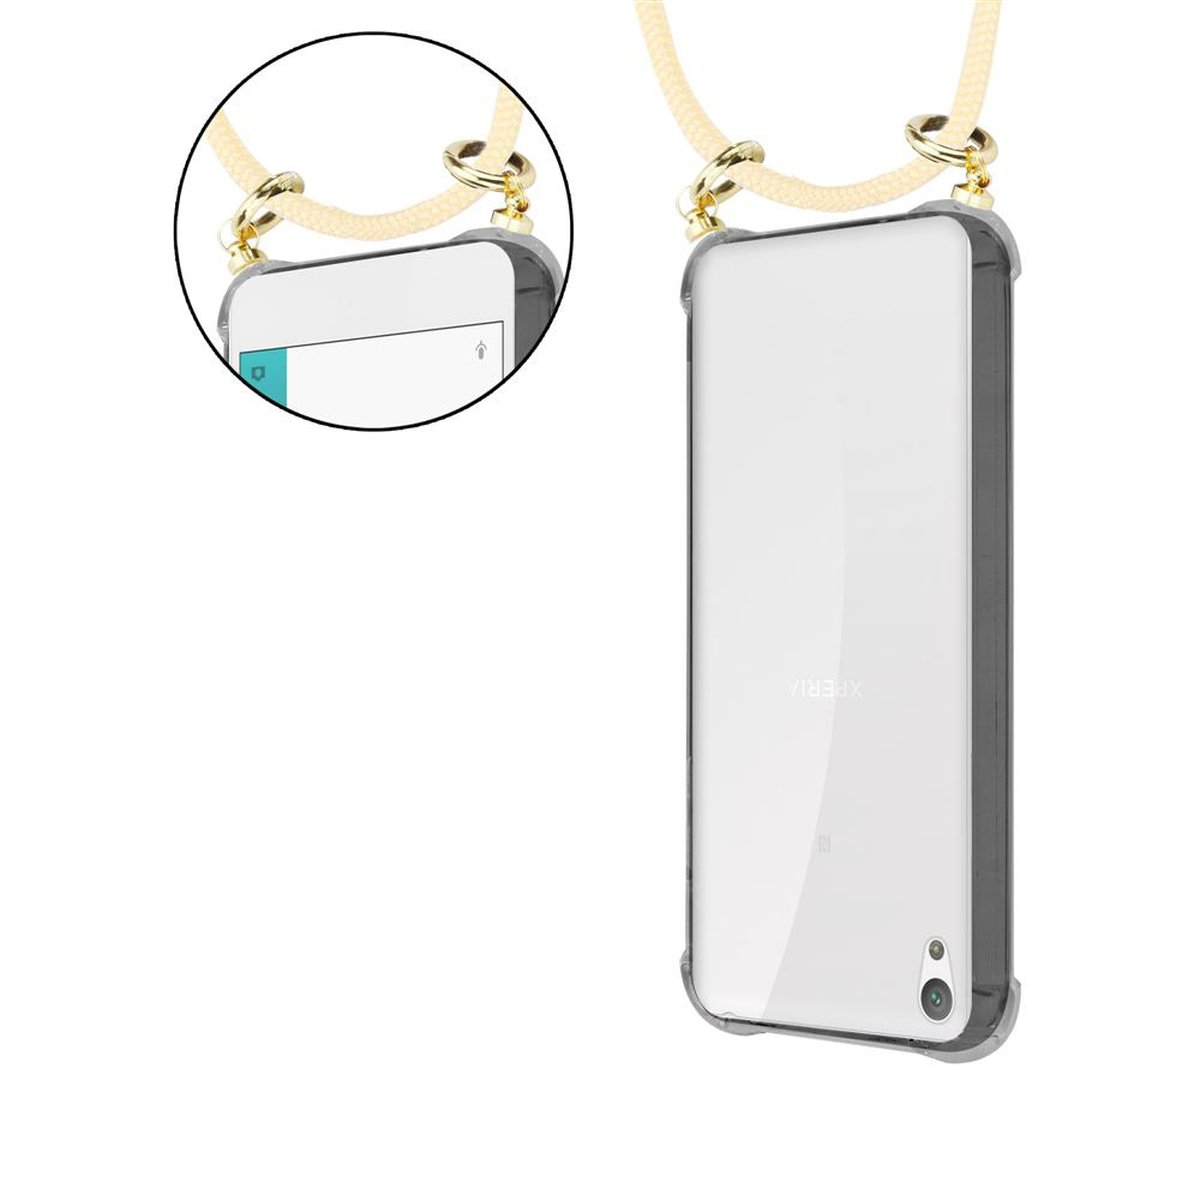 CADORABO Handy Kette mit Gold BEIGE abnehmbarer und Sony, CREME Backcover, Kordel Band Hülle, E5, Ringen, Xperia